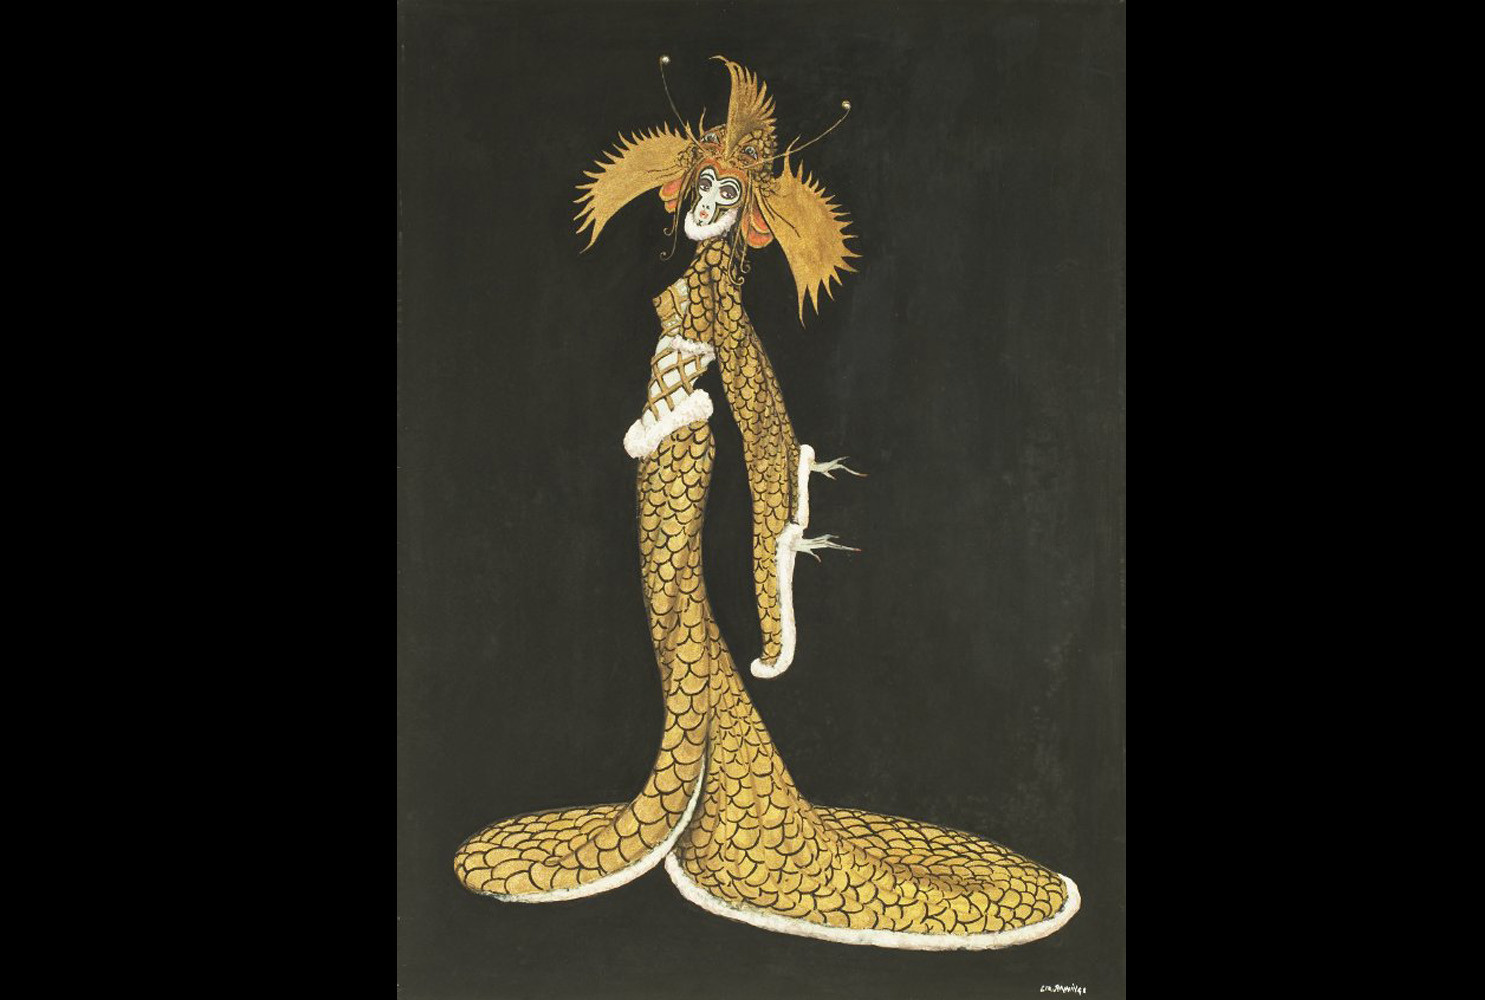 Costume Design for a Marine Ballet, Edward “Ned” I.R. Jennings (American, 1898 – 1929). Gouache on board, 17 ¾ x 12 7/8 inches.
XX1978.001